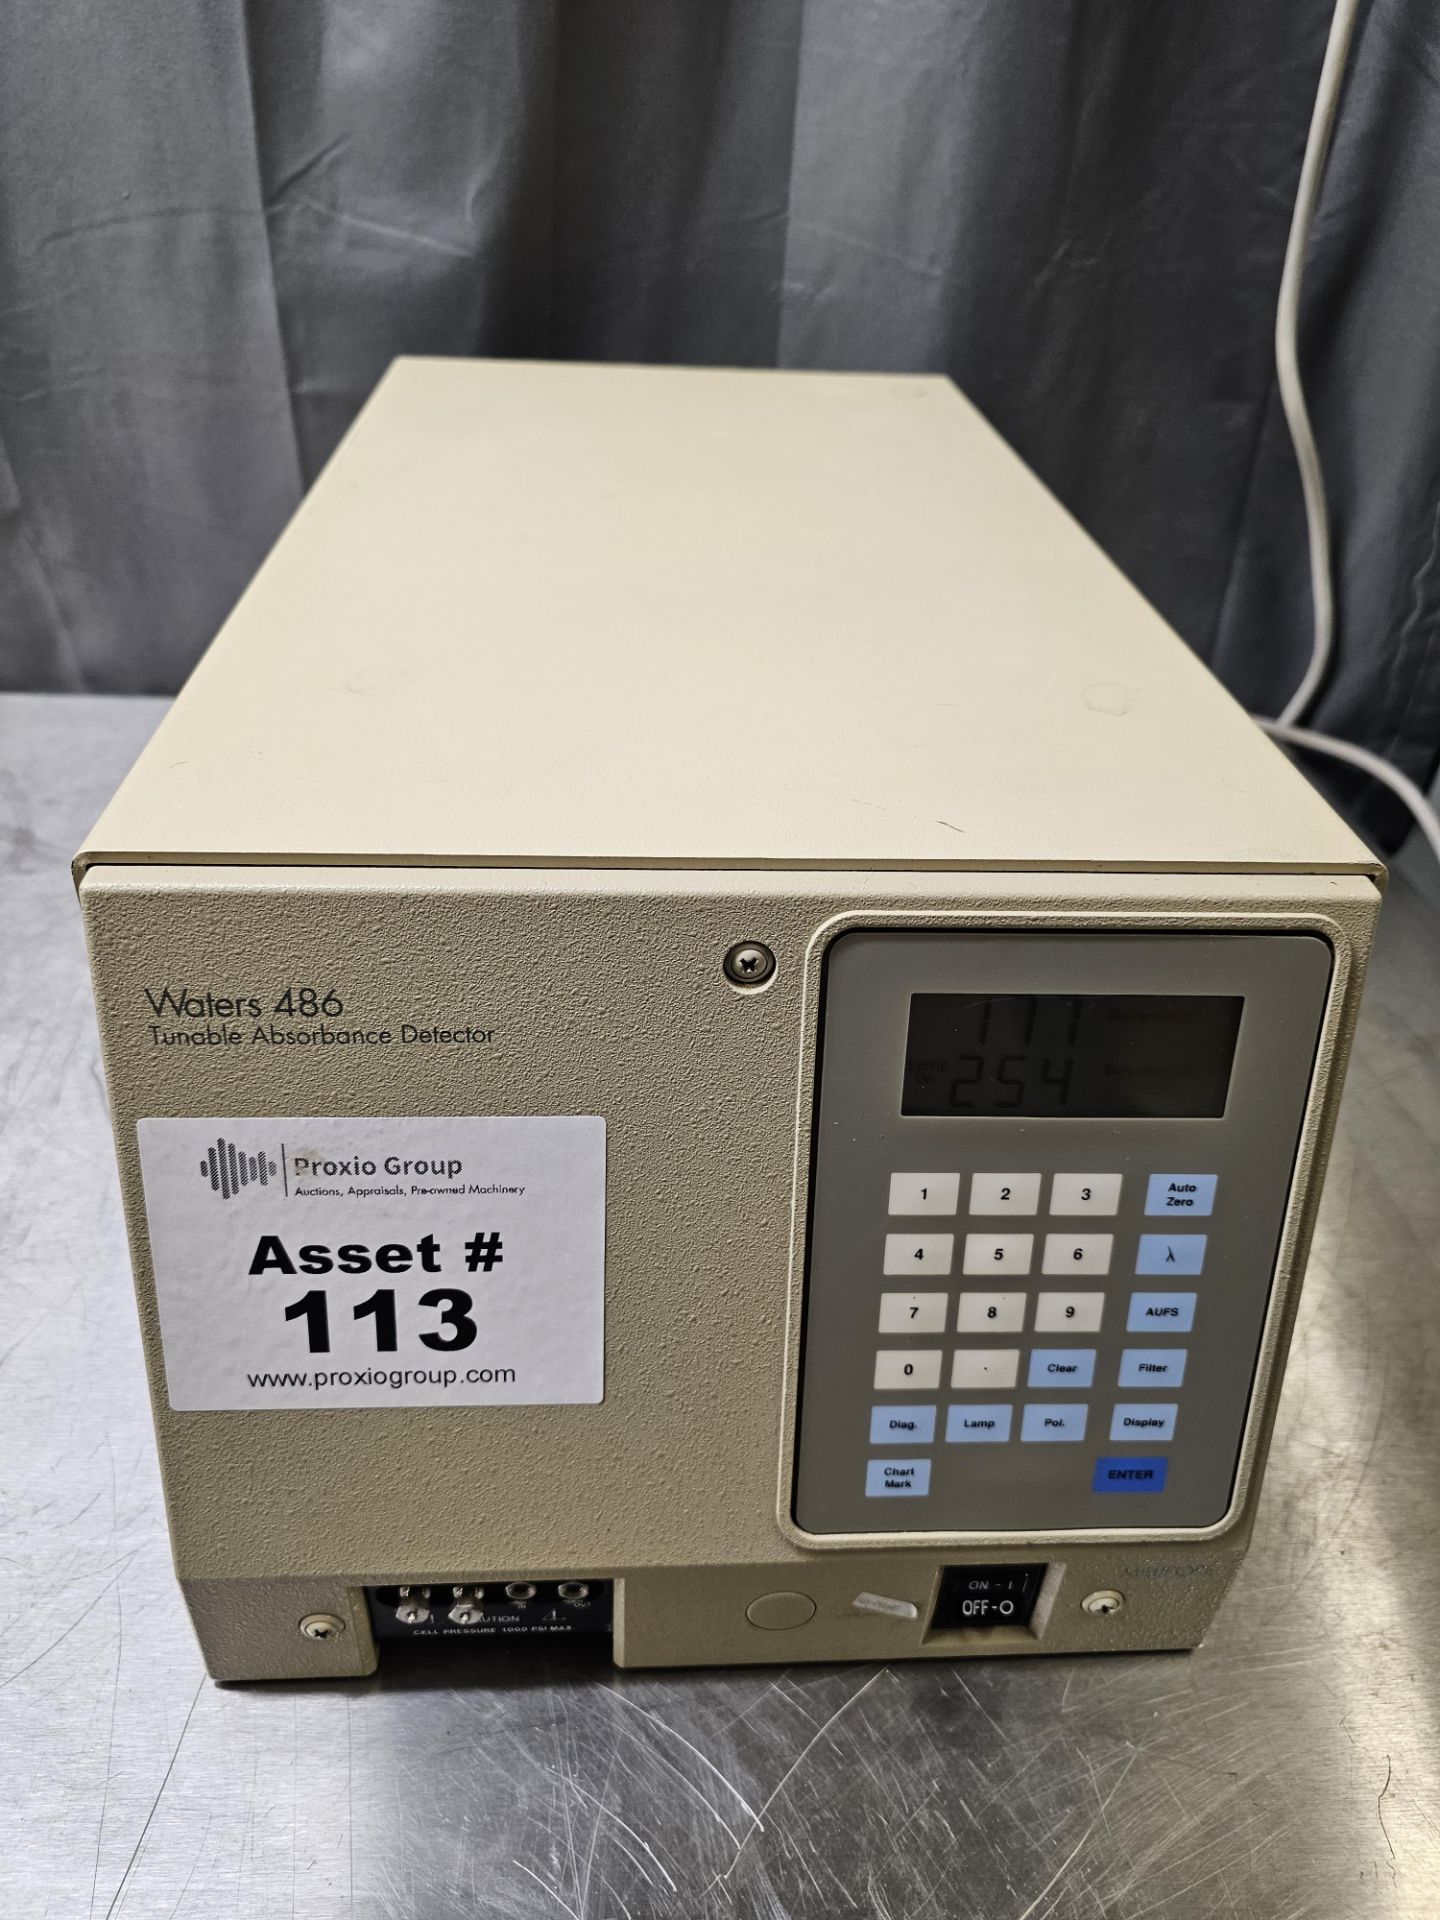 Waters Model 486 Tunable Absorbance Detector sn 486-PRA407 Bldg Loc: Location 6 This Lot Ships From: - Image 3 of 5